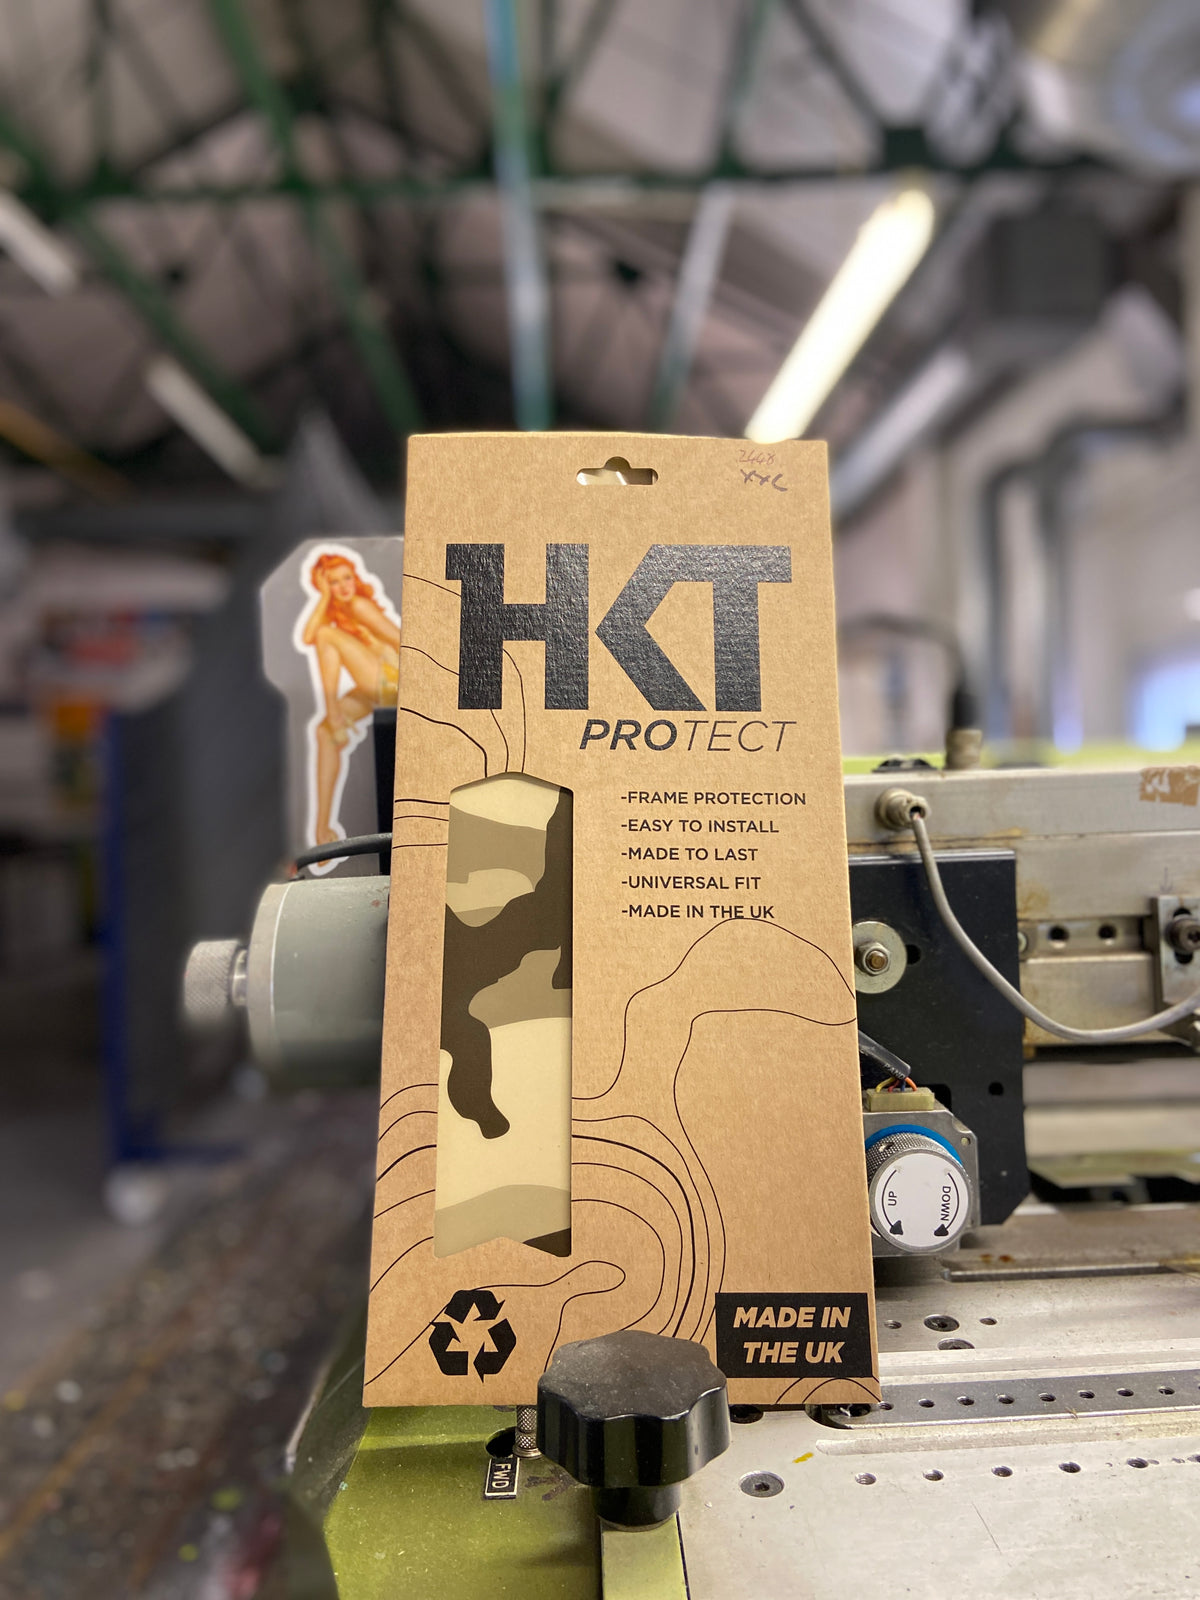 Frame Protection Kit [XL] - By HKT Protect // Camo